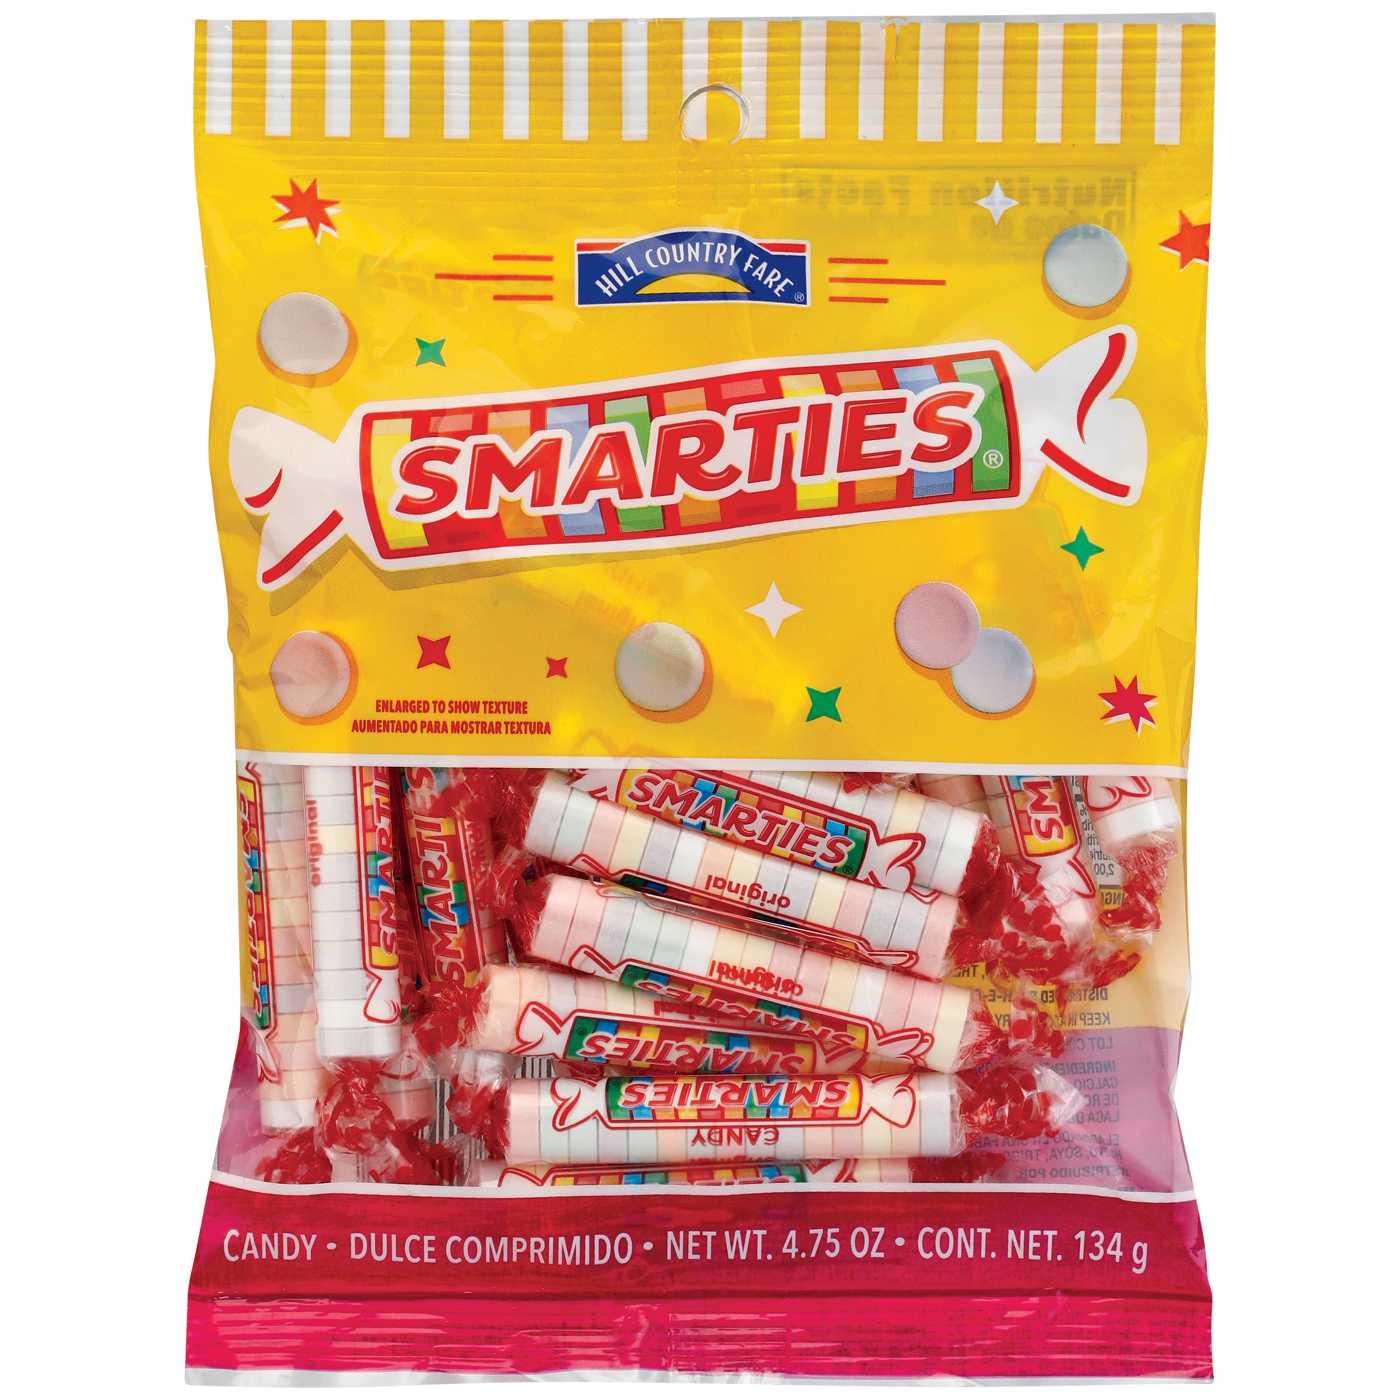 Hill Country Fare Smarties Candy; image 1 of 2